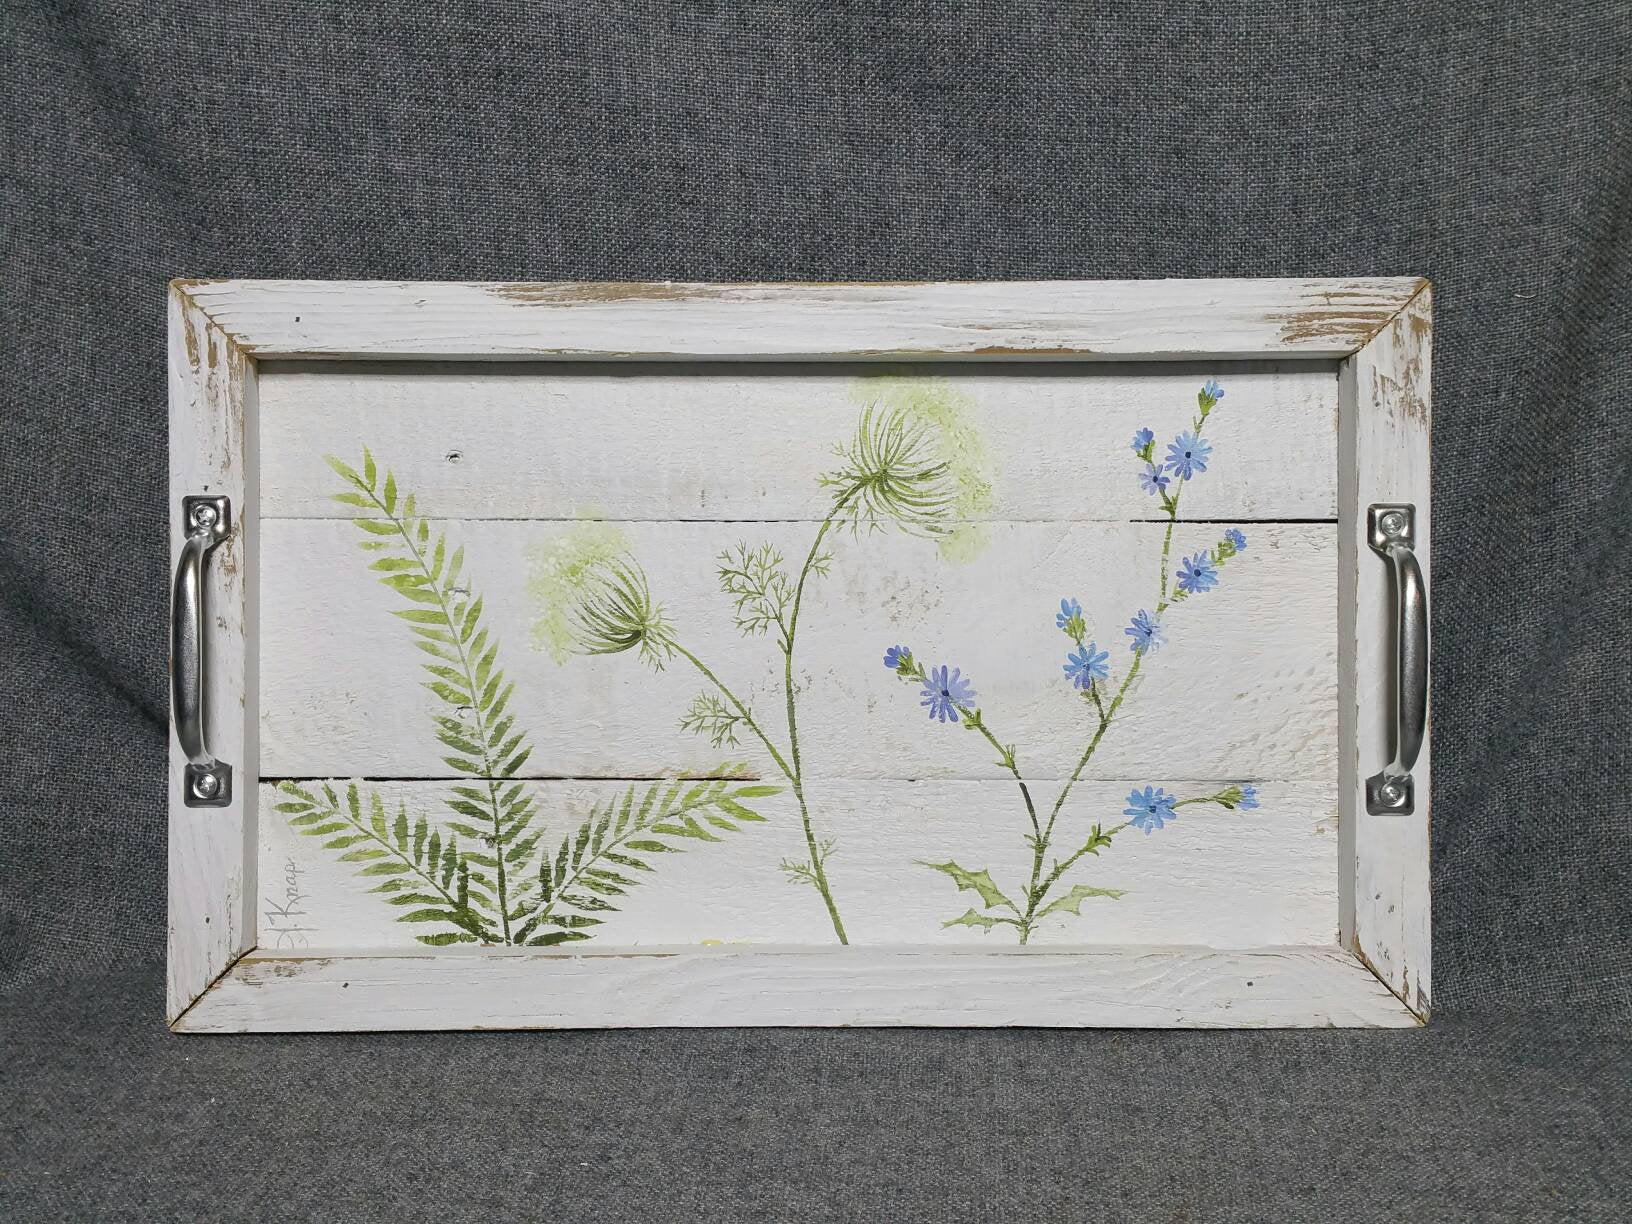 Wild flower hand painted Decorative tray on pallet wood, Rustic farmhouse decor, table tray with Spring flowers